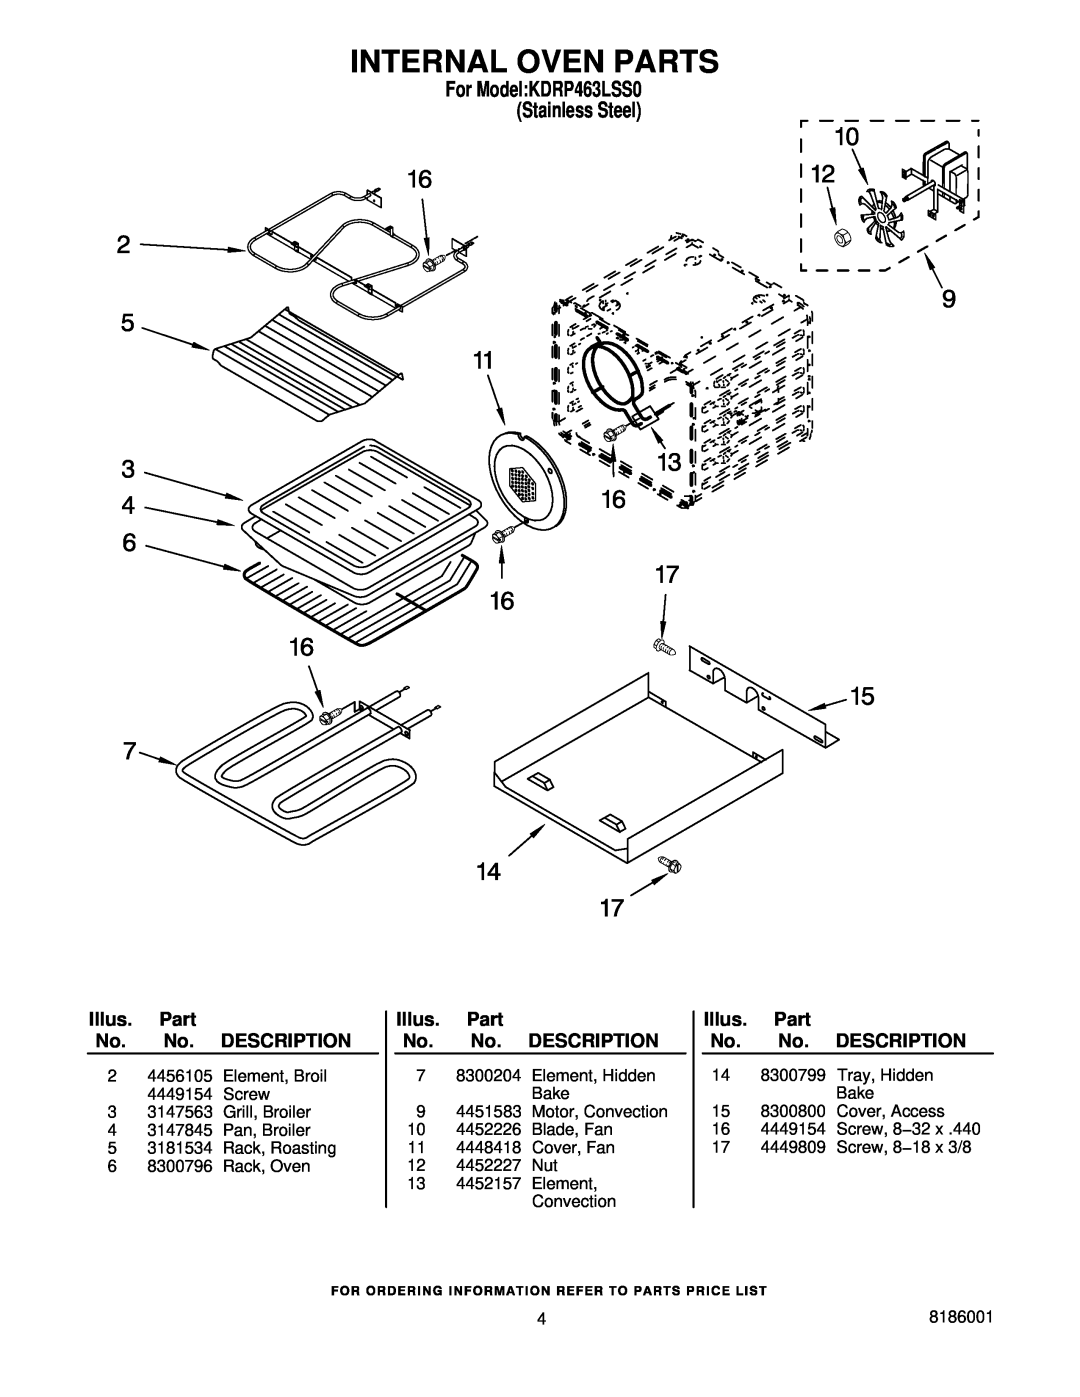 KitchenAid manual Internal Oven Parts, For ModelKDRP463LSS0 Stainless Steel, Illus. Part No. No. DESCRIPTION 